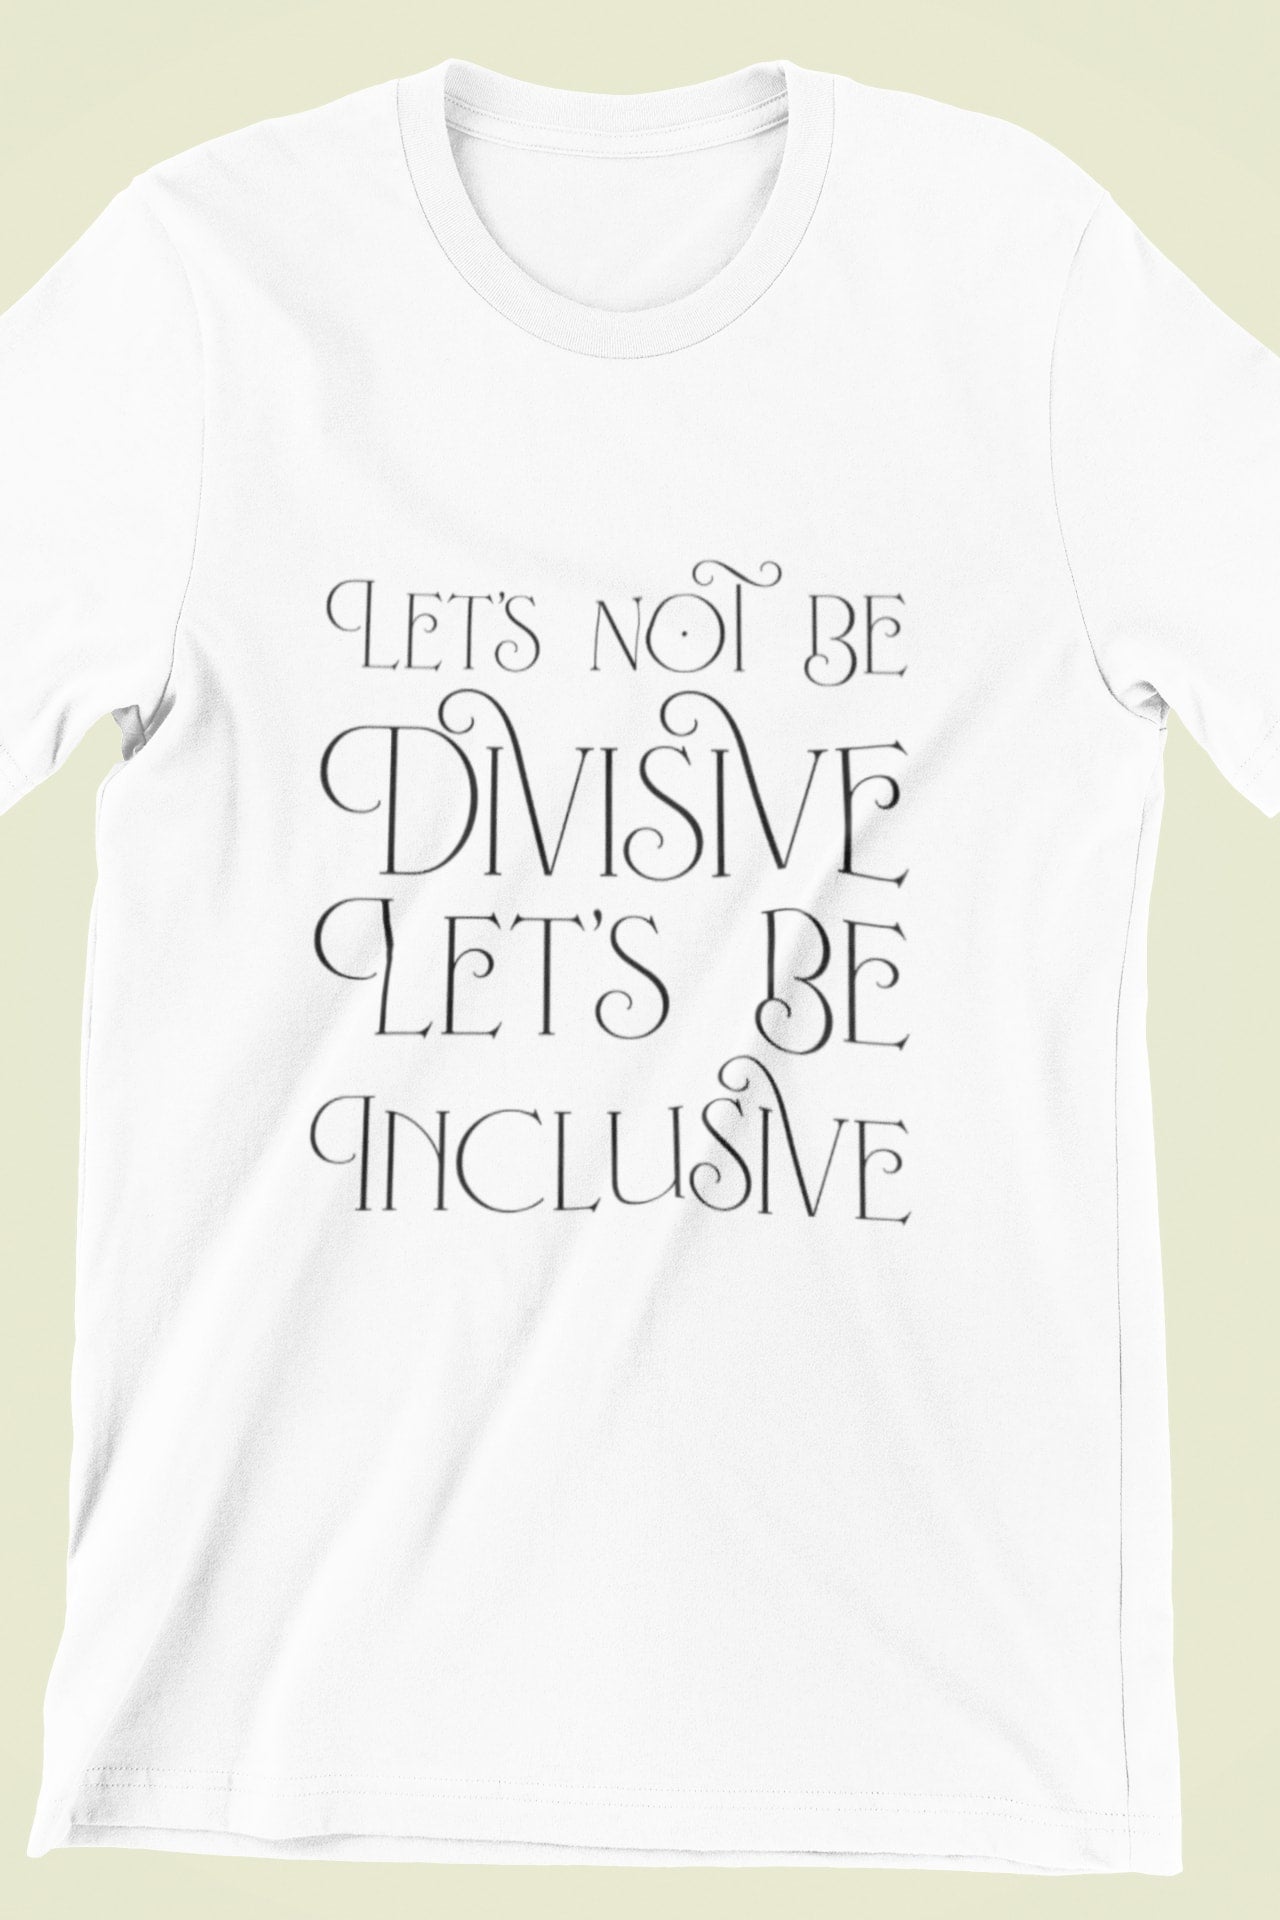 Let’s Not Be Divisive Let’s Be Inclusive Short Sleeve T-Shirt (Men’s) - Clothing